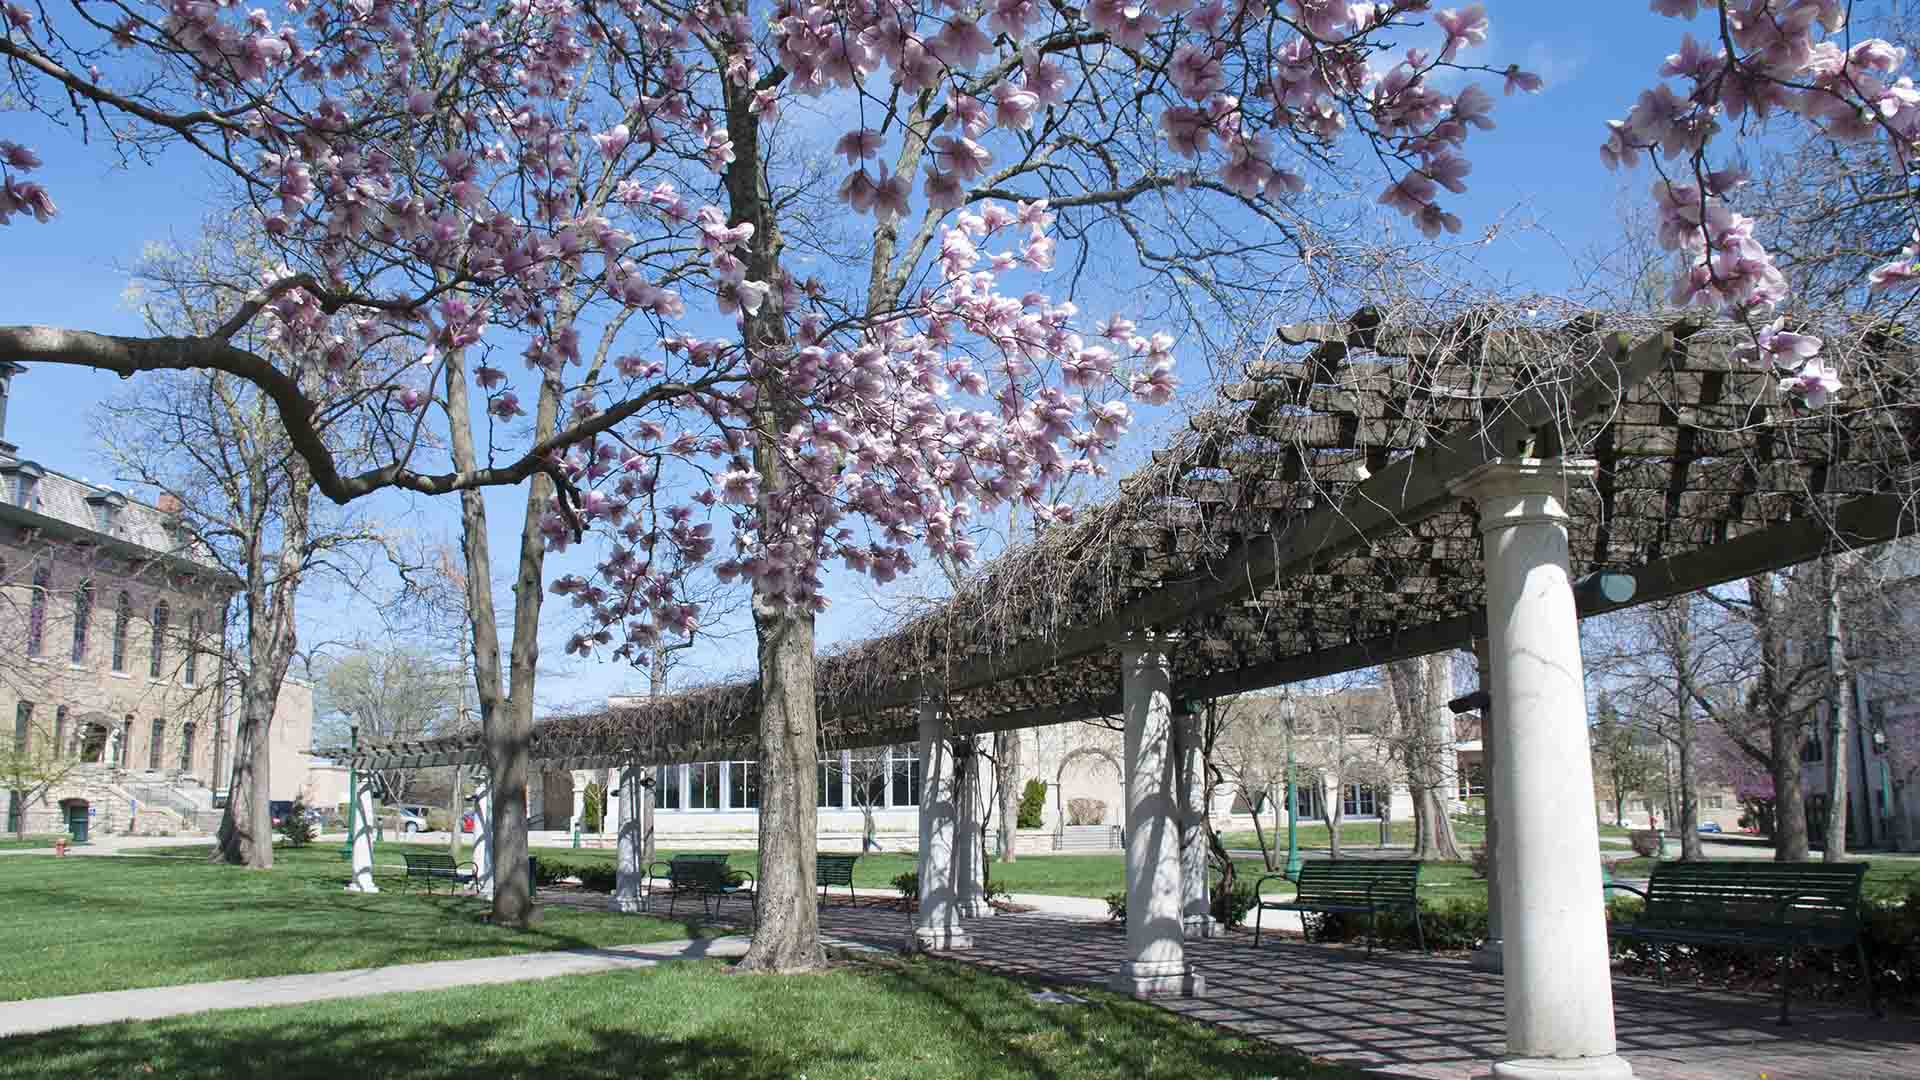 Photo of the grape arbor on campus during the spring